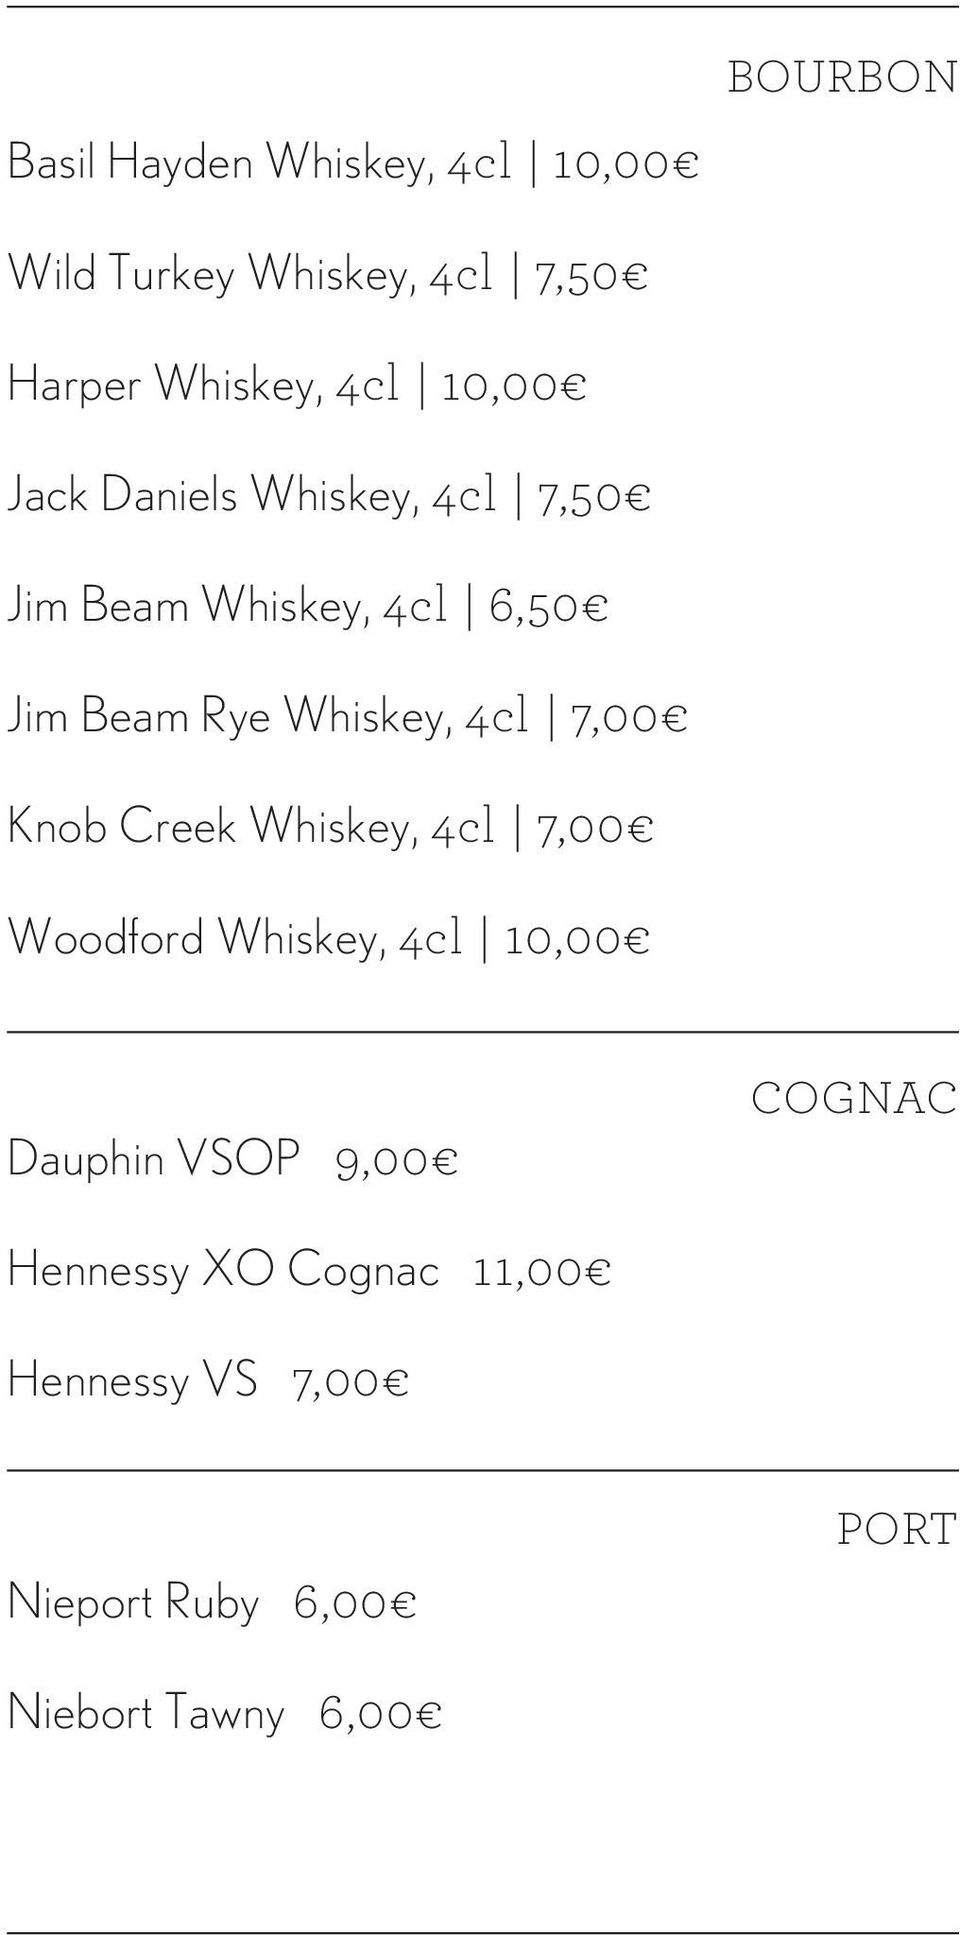 Whiskey, 4cl 7,00 Knob Creek Whiskey, 4cl 7,00 Woodford Whiskey, 4cl 10,00 Dauphin VSOP